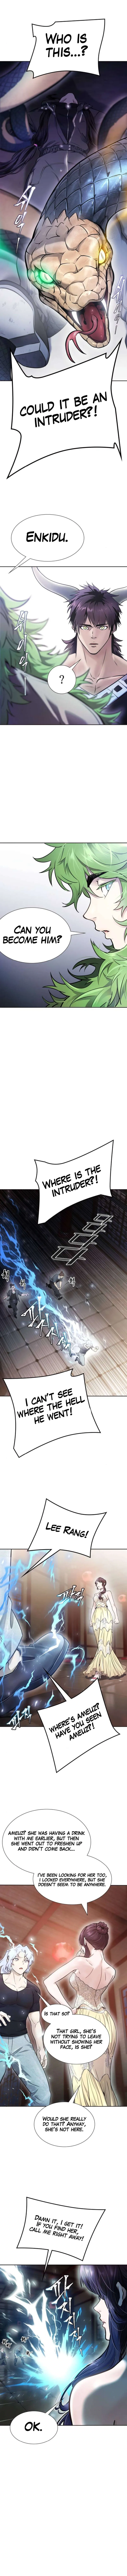 Tower of god chapter 619